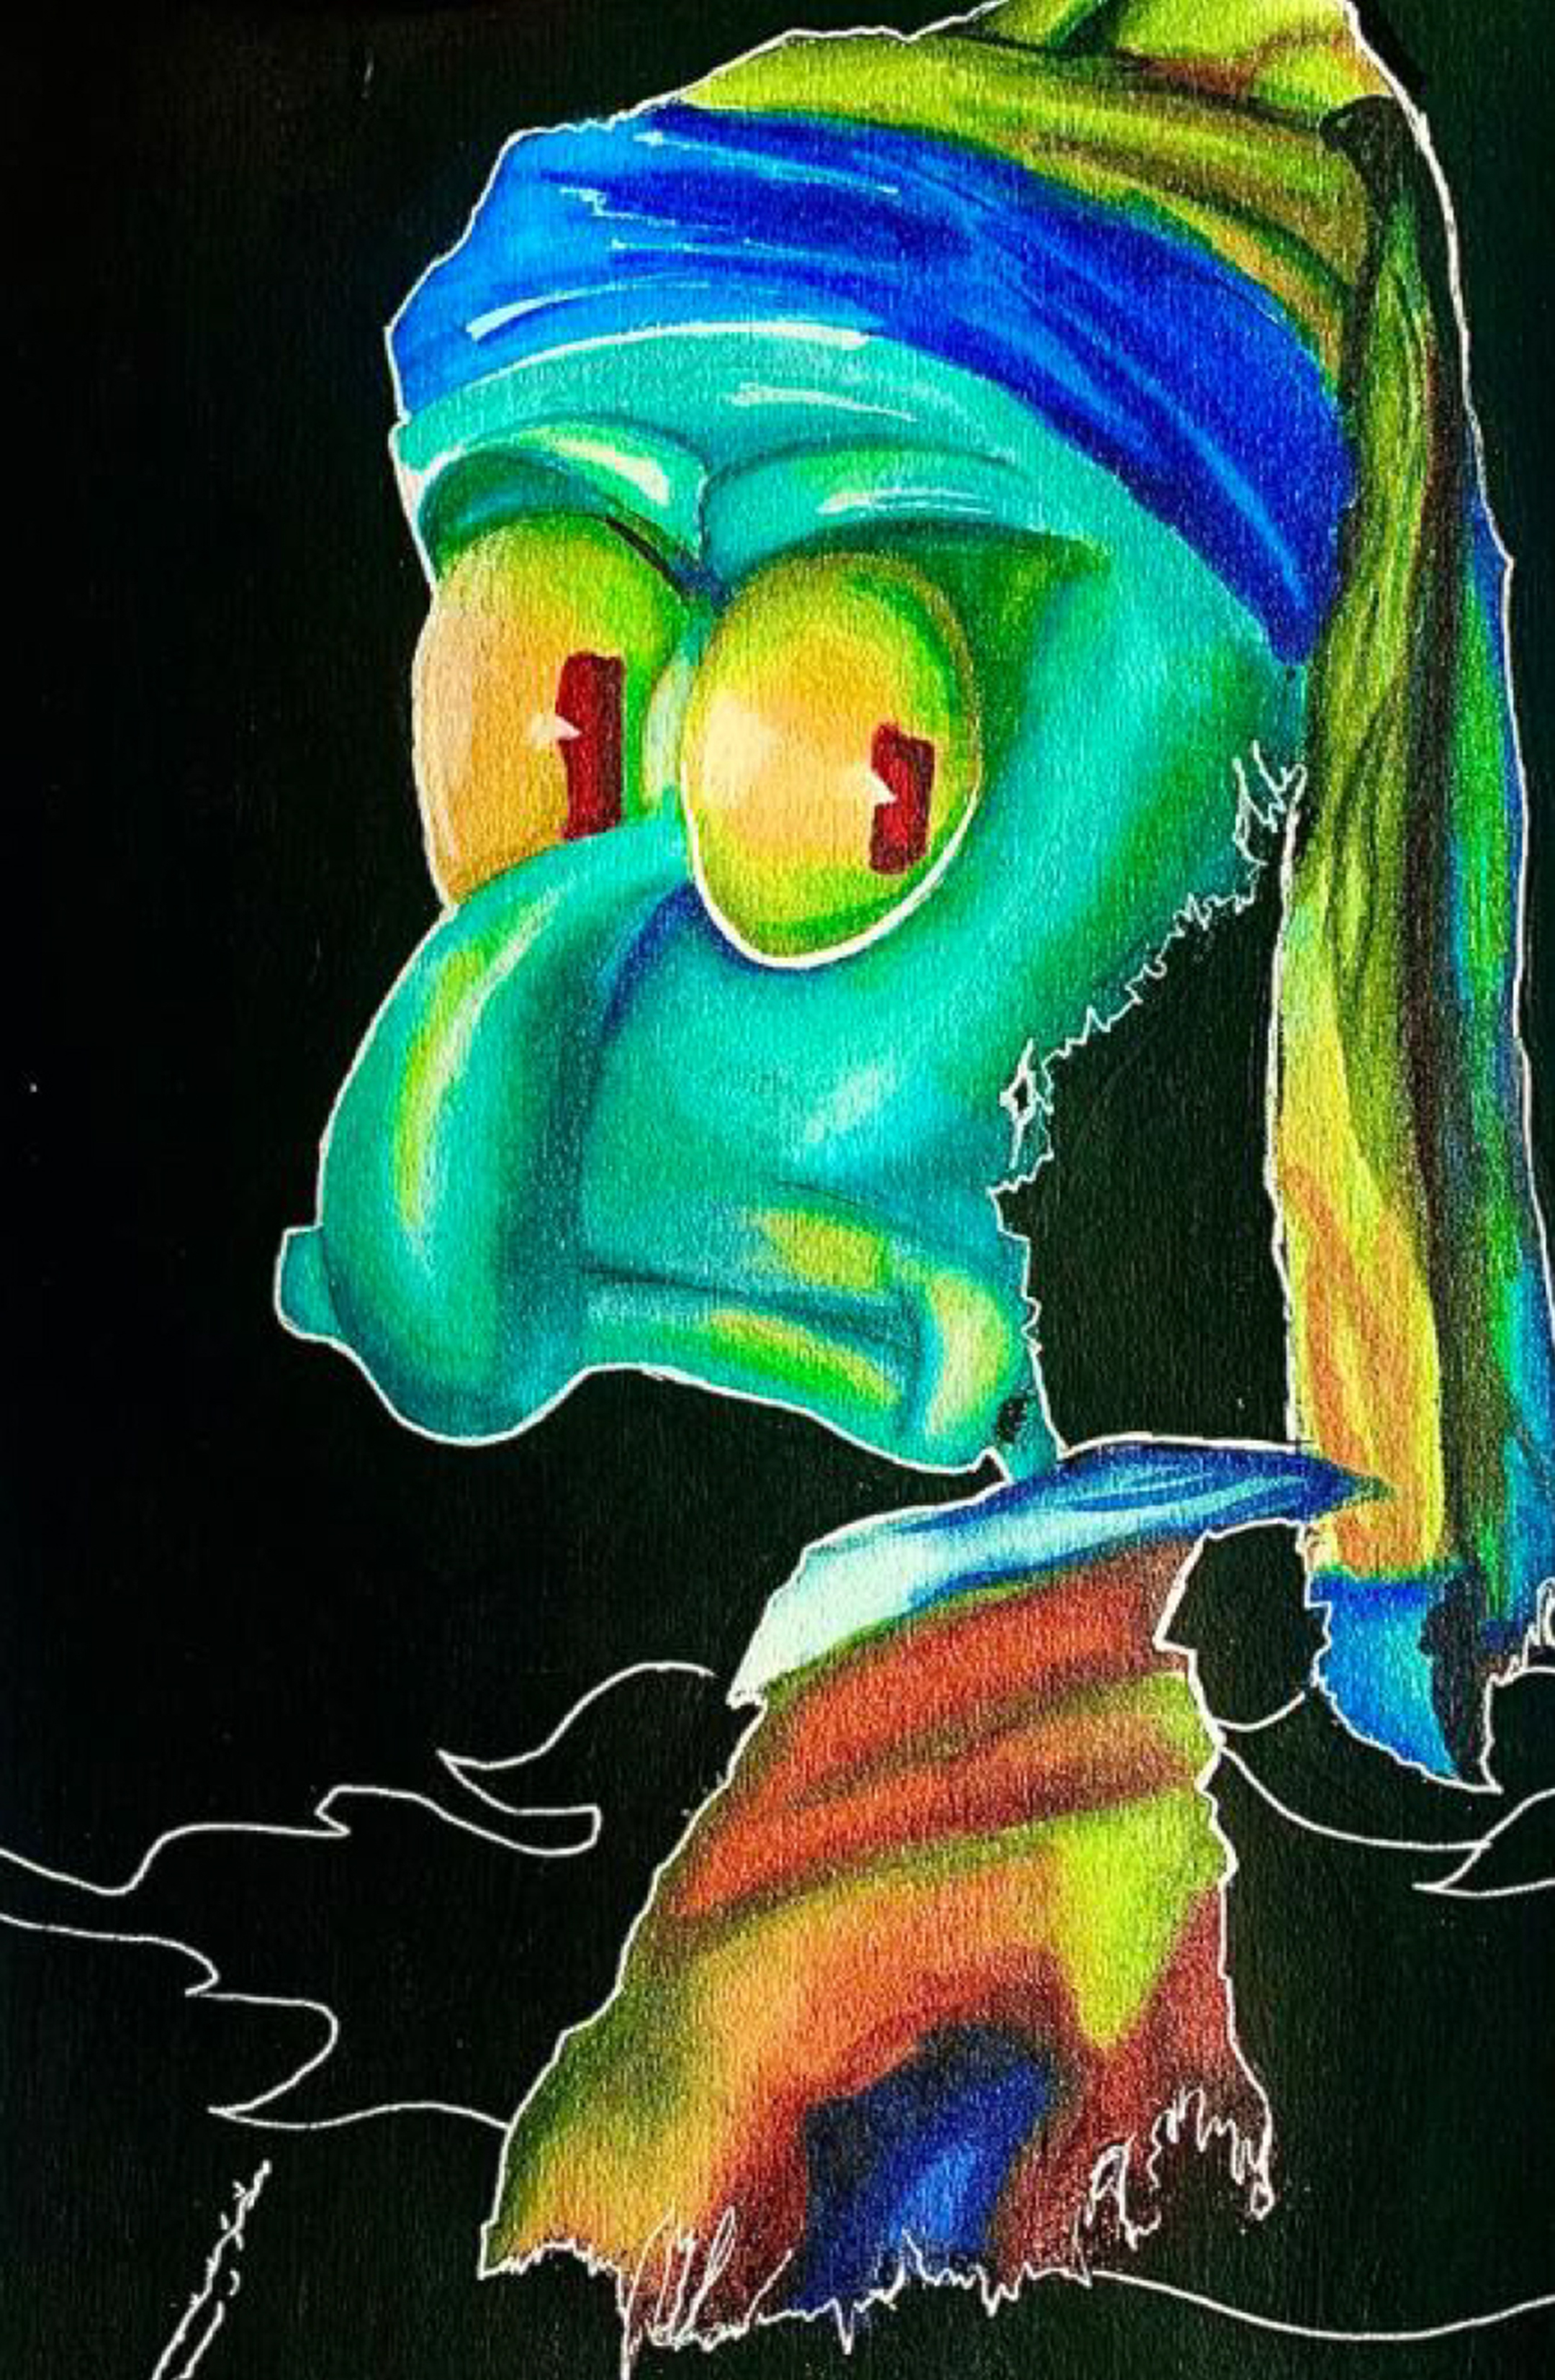 Painting depicting Squidward from Spongebob Squarepants as the Girl with the Pearl Earring